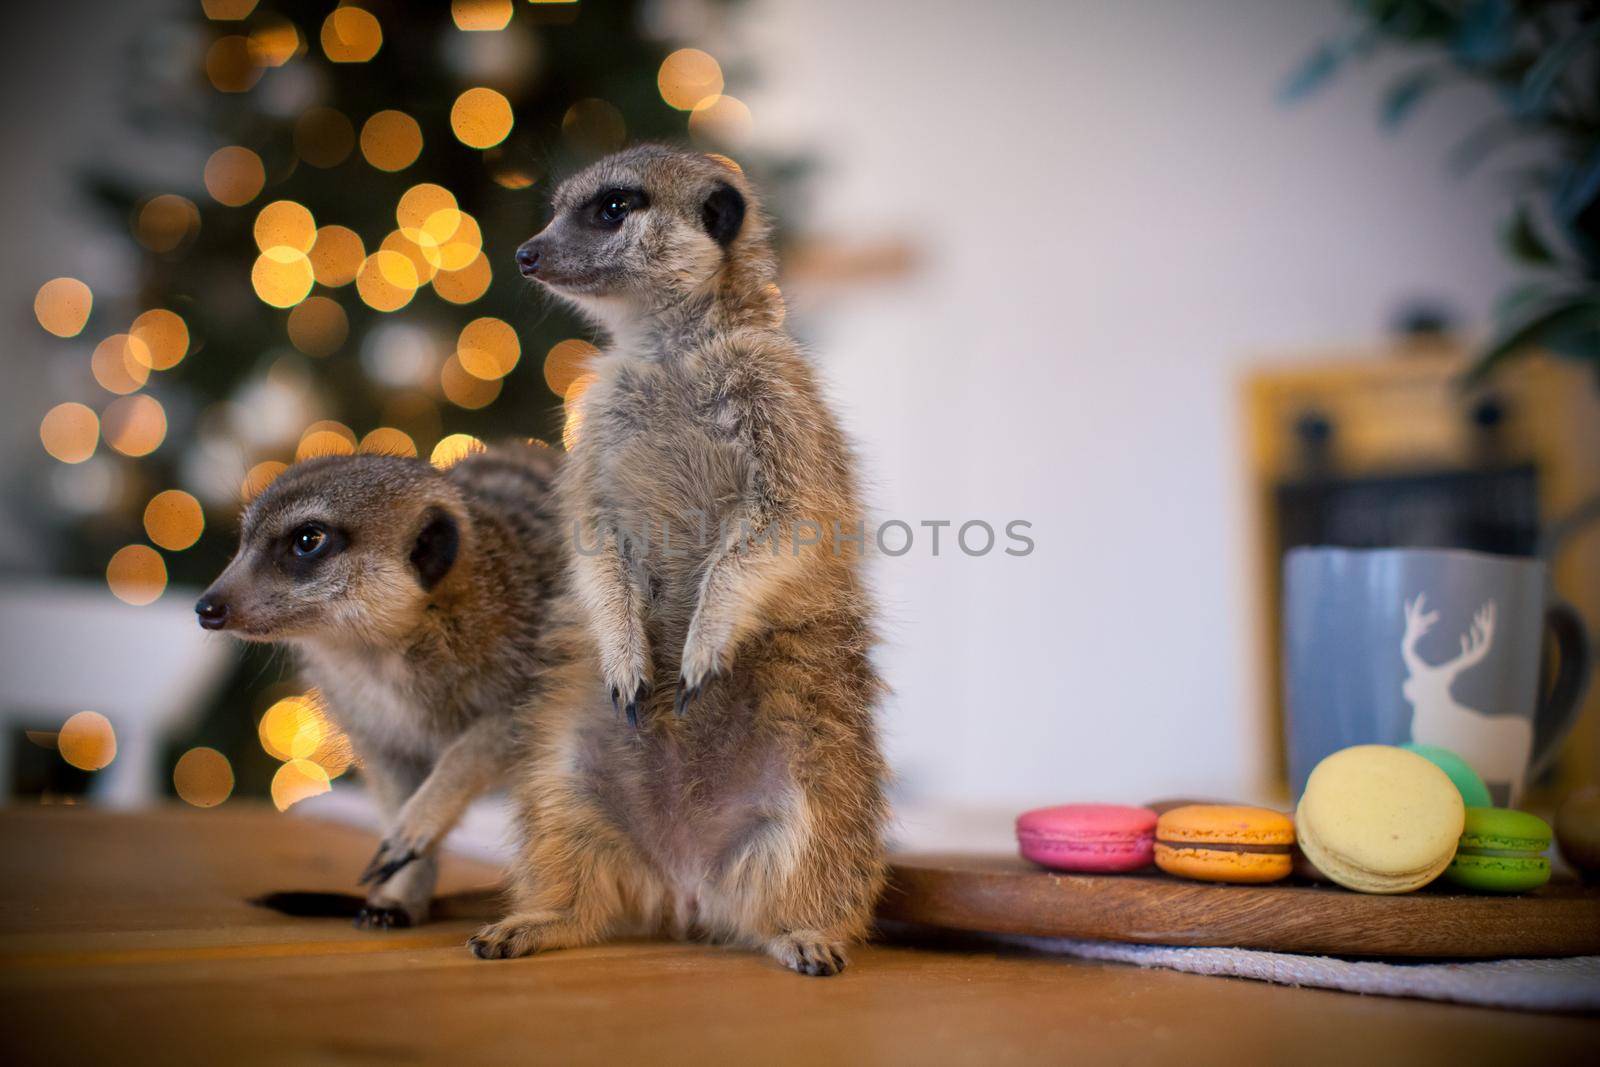 The meerkat or suricate cubs in decorated room with Christmass tree. by RosaJay